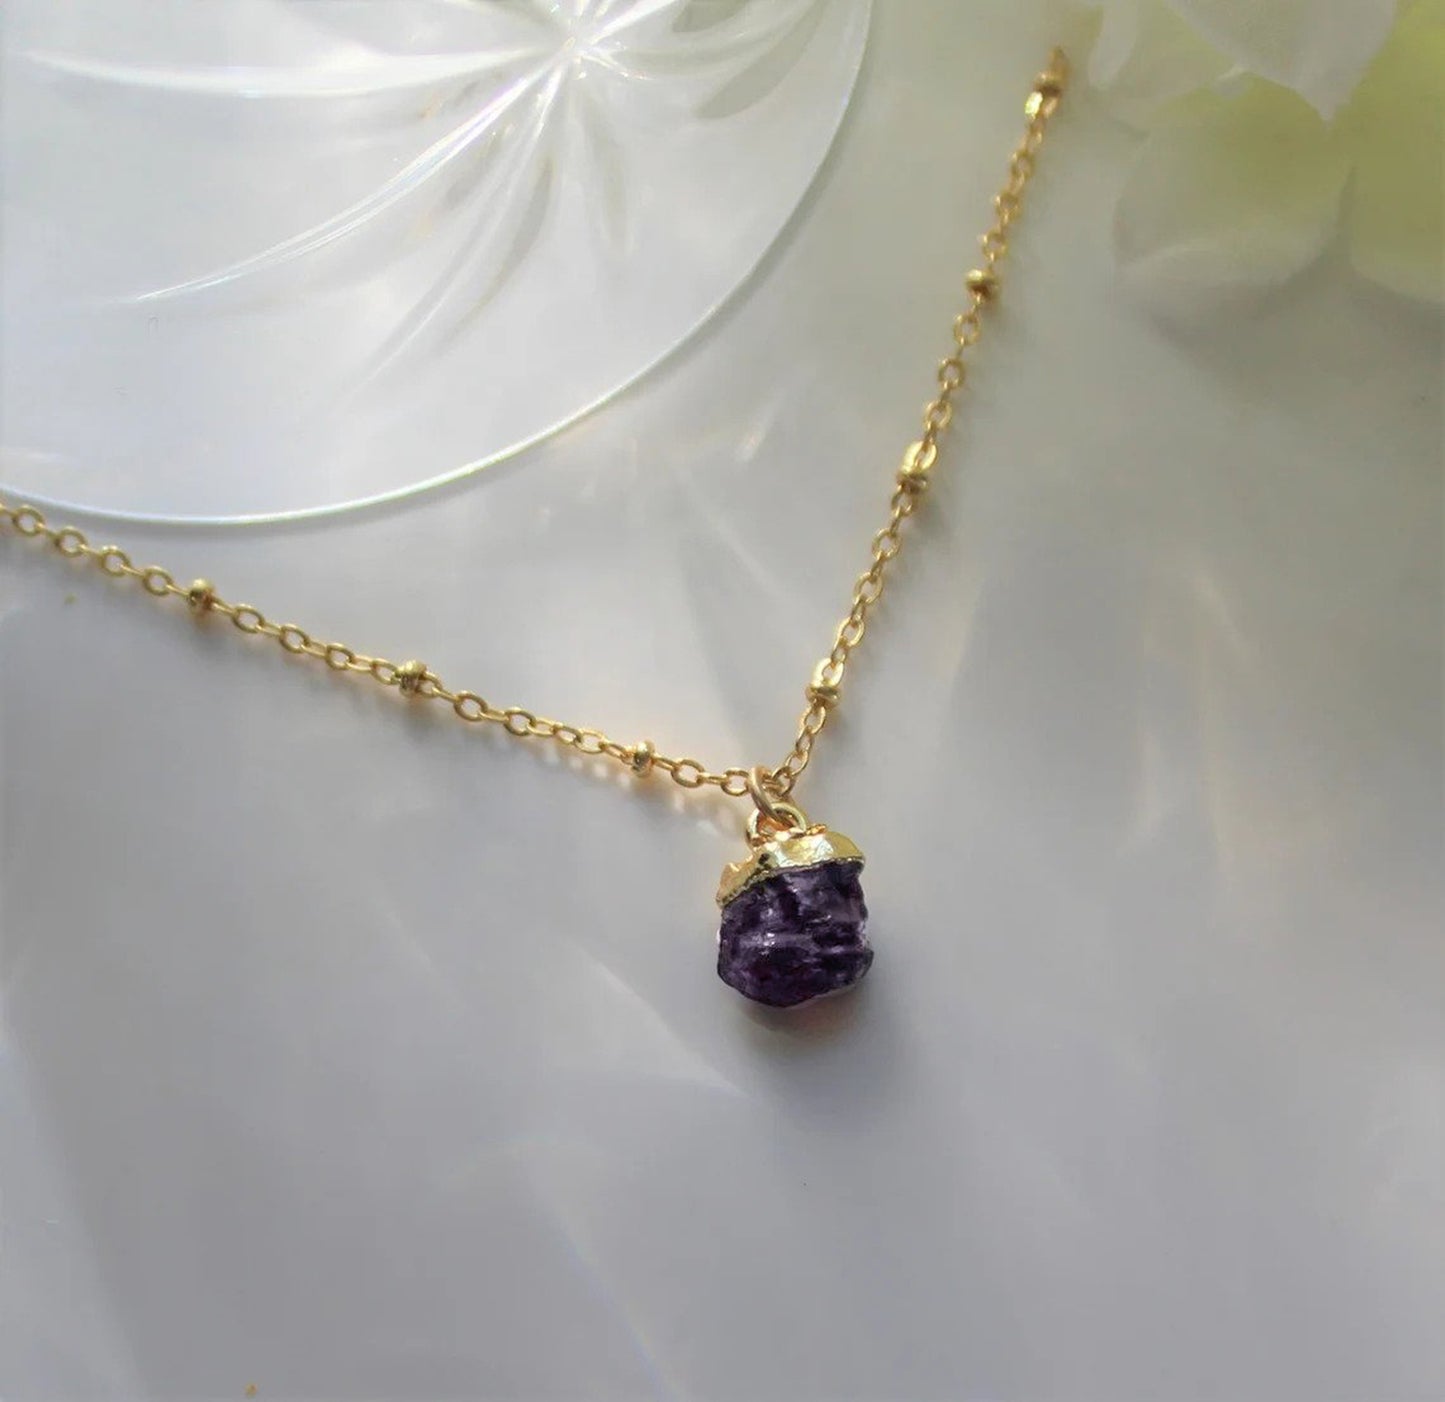 Natural purple amethyst gemstone has been made into a gold pendant and is featured on a gold filled satellite necklace chain and is displayed on a pale green surface with many light reflections.